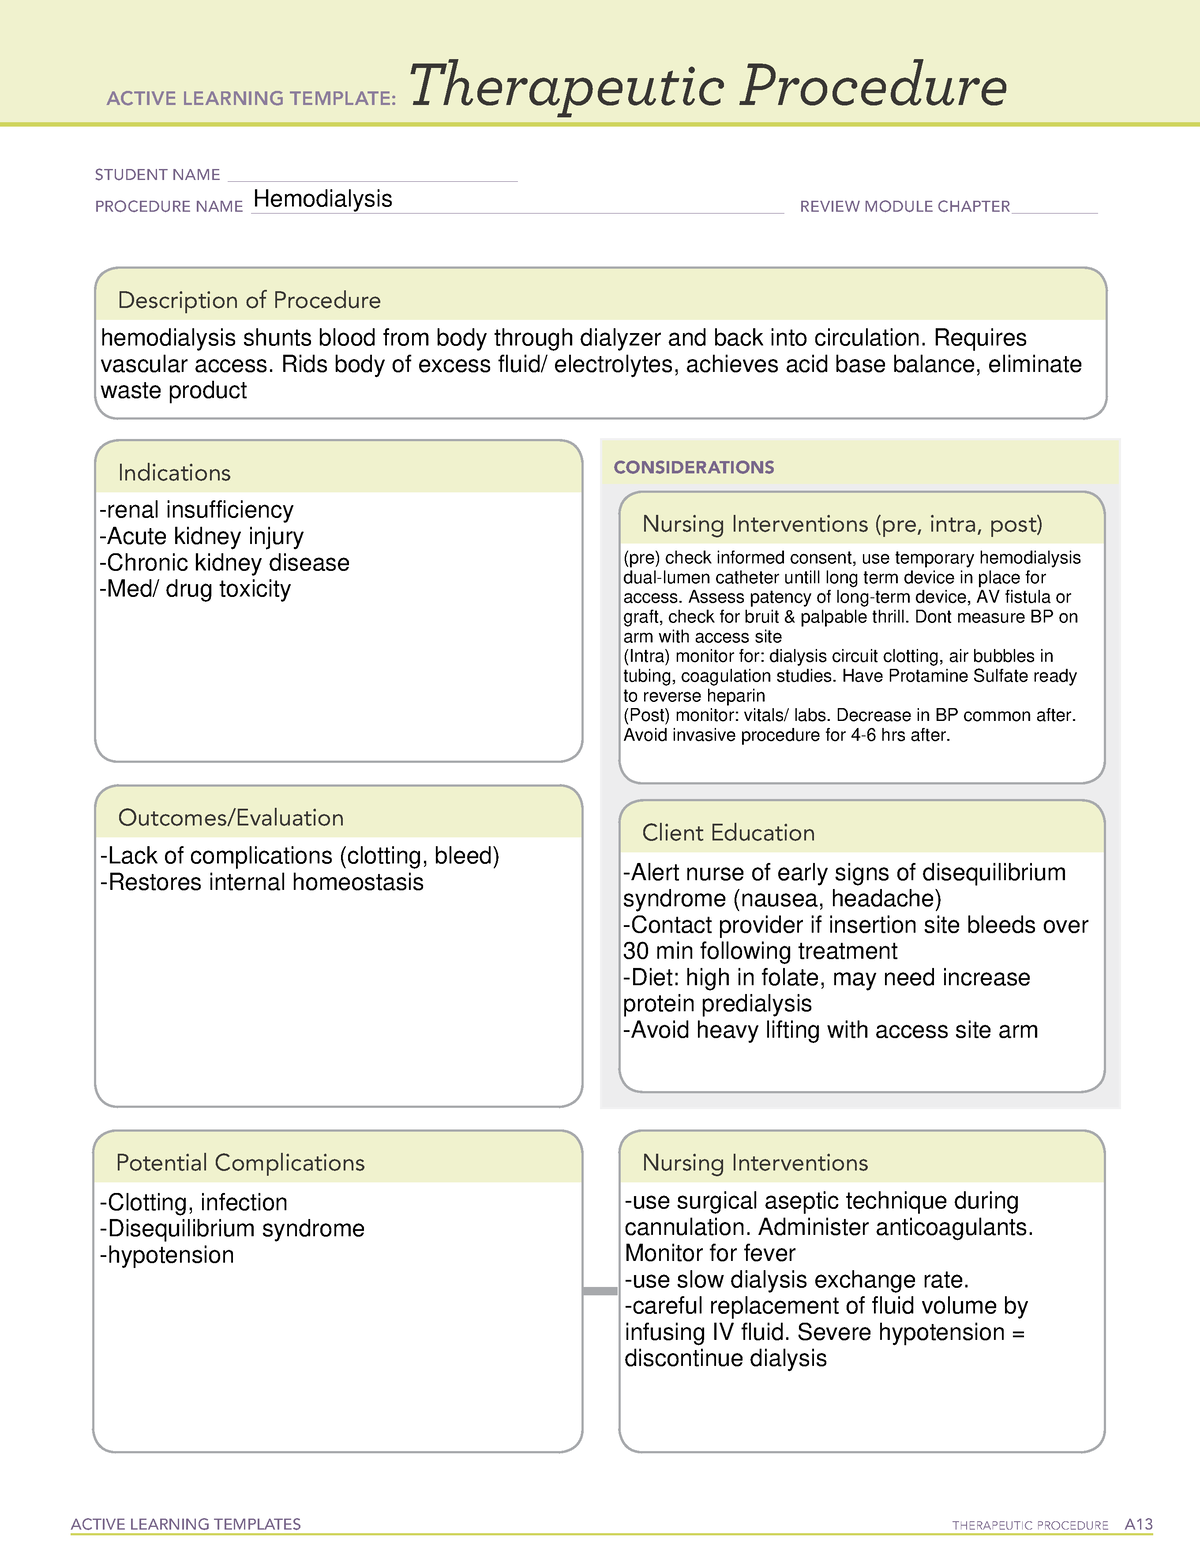 Template Therapeutic Procedure Hemodialysis ACTIVE LEARNING TEMPLATES